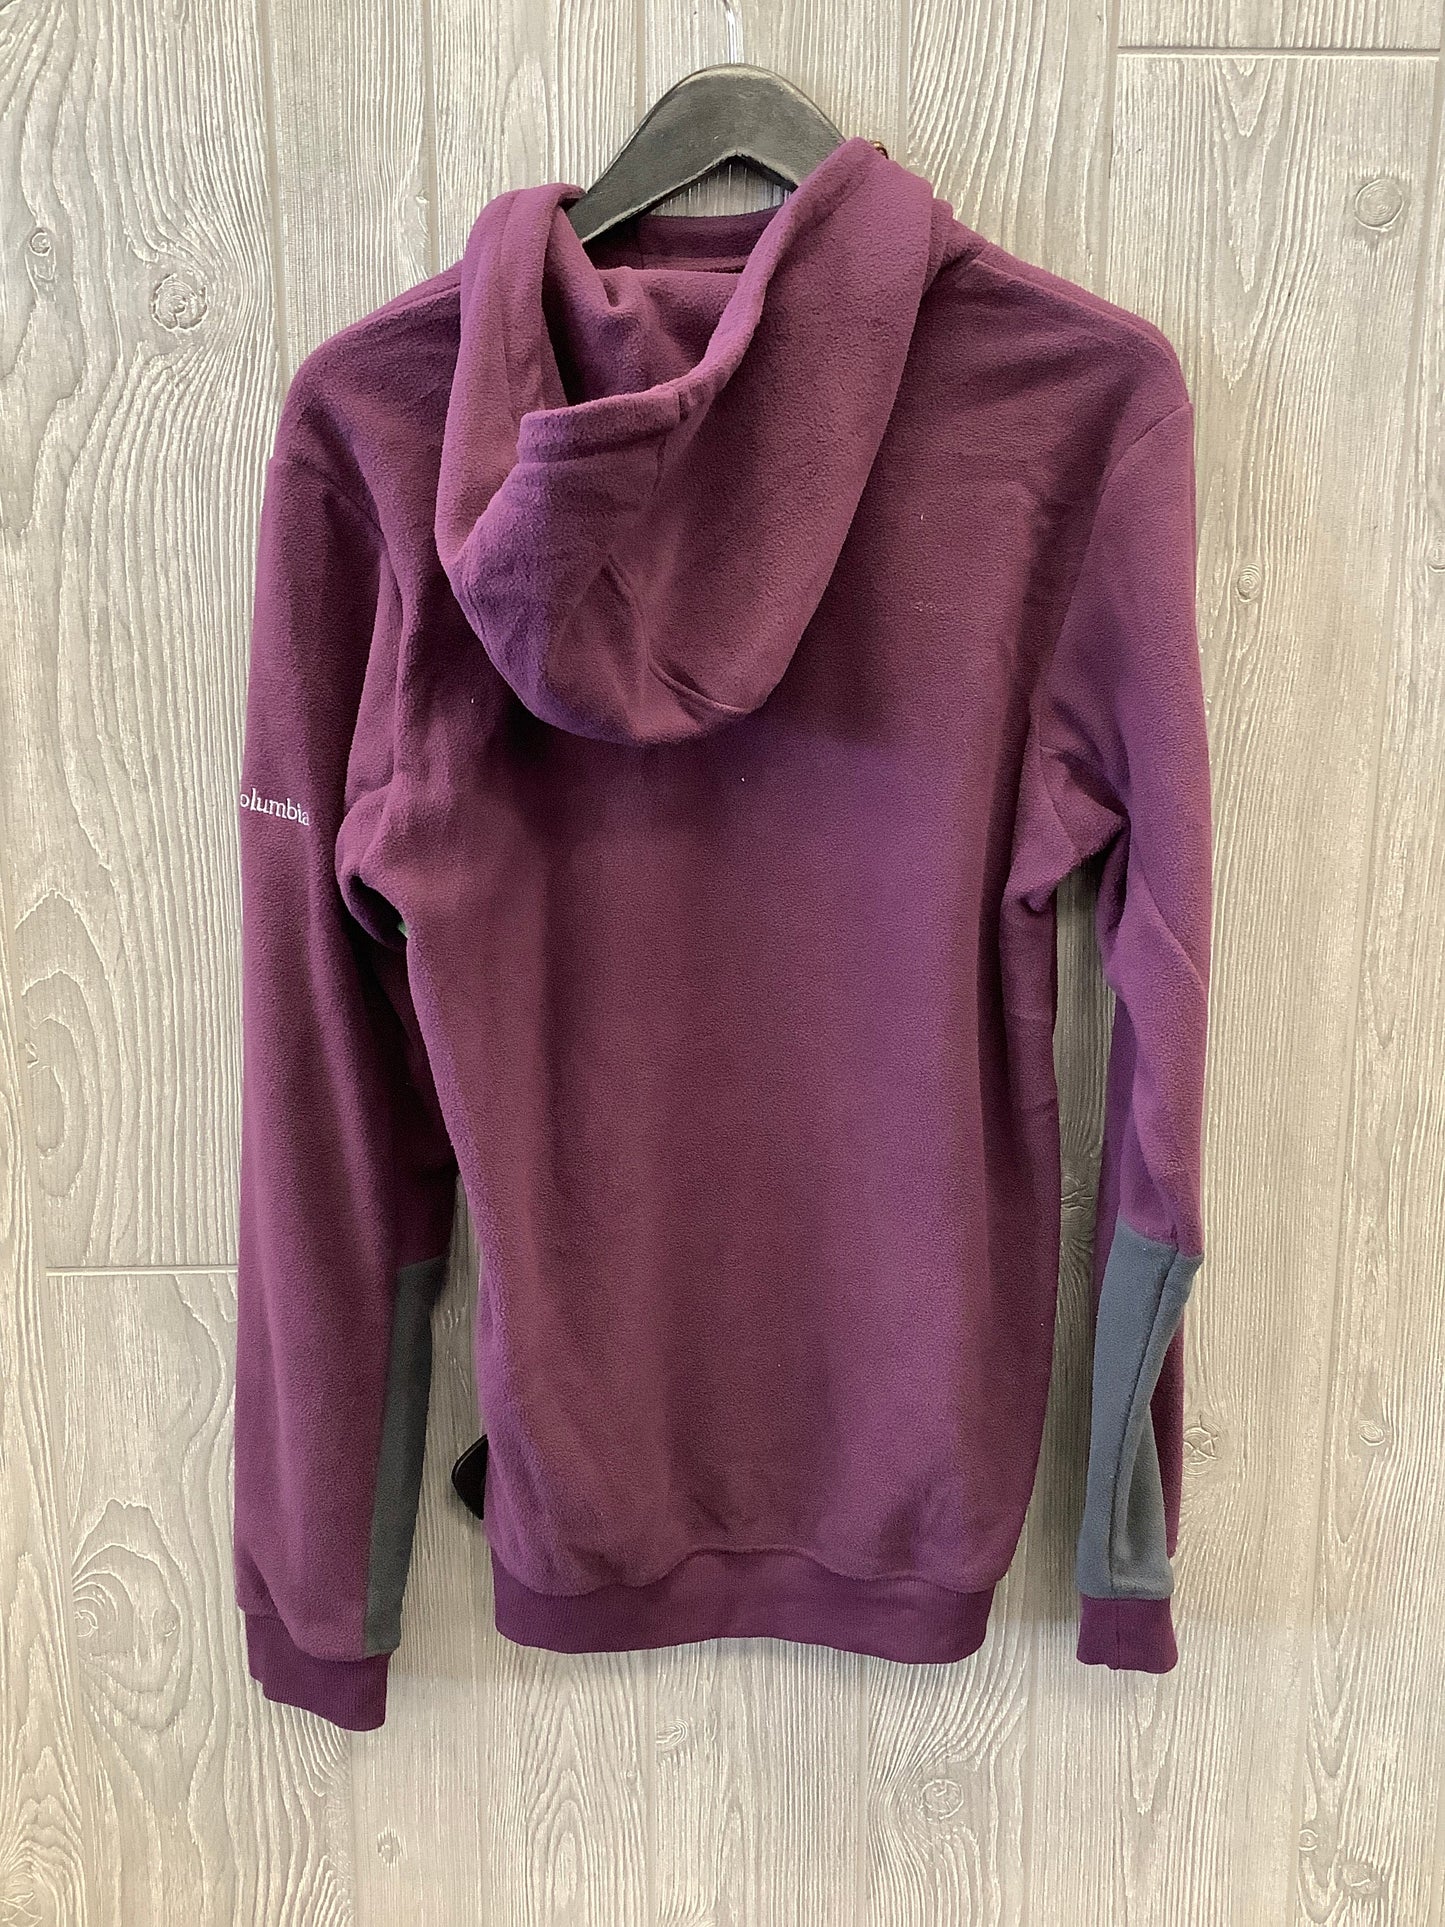 Athletic Top Long Sleeve Hoodie By Columbia  Size: S